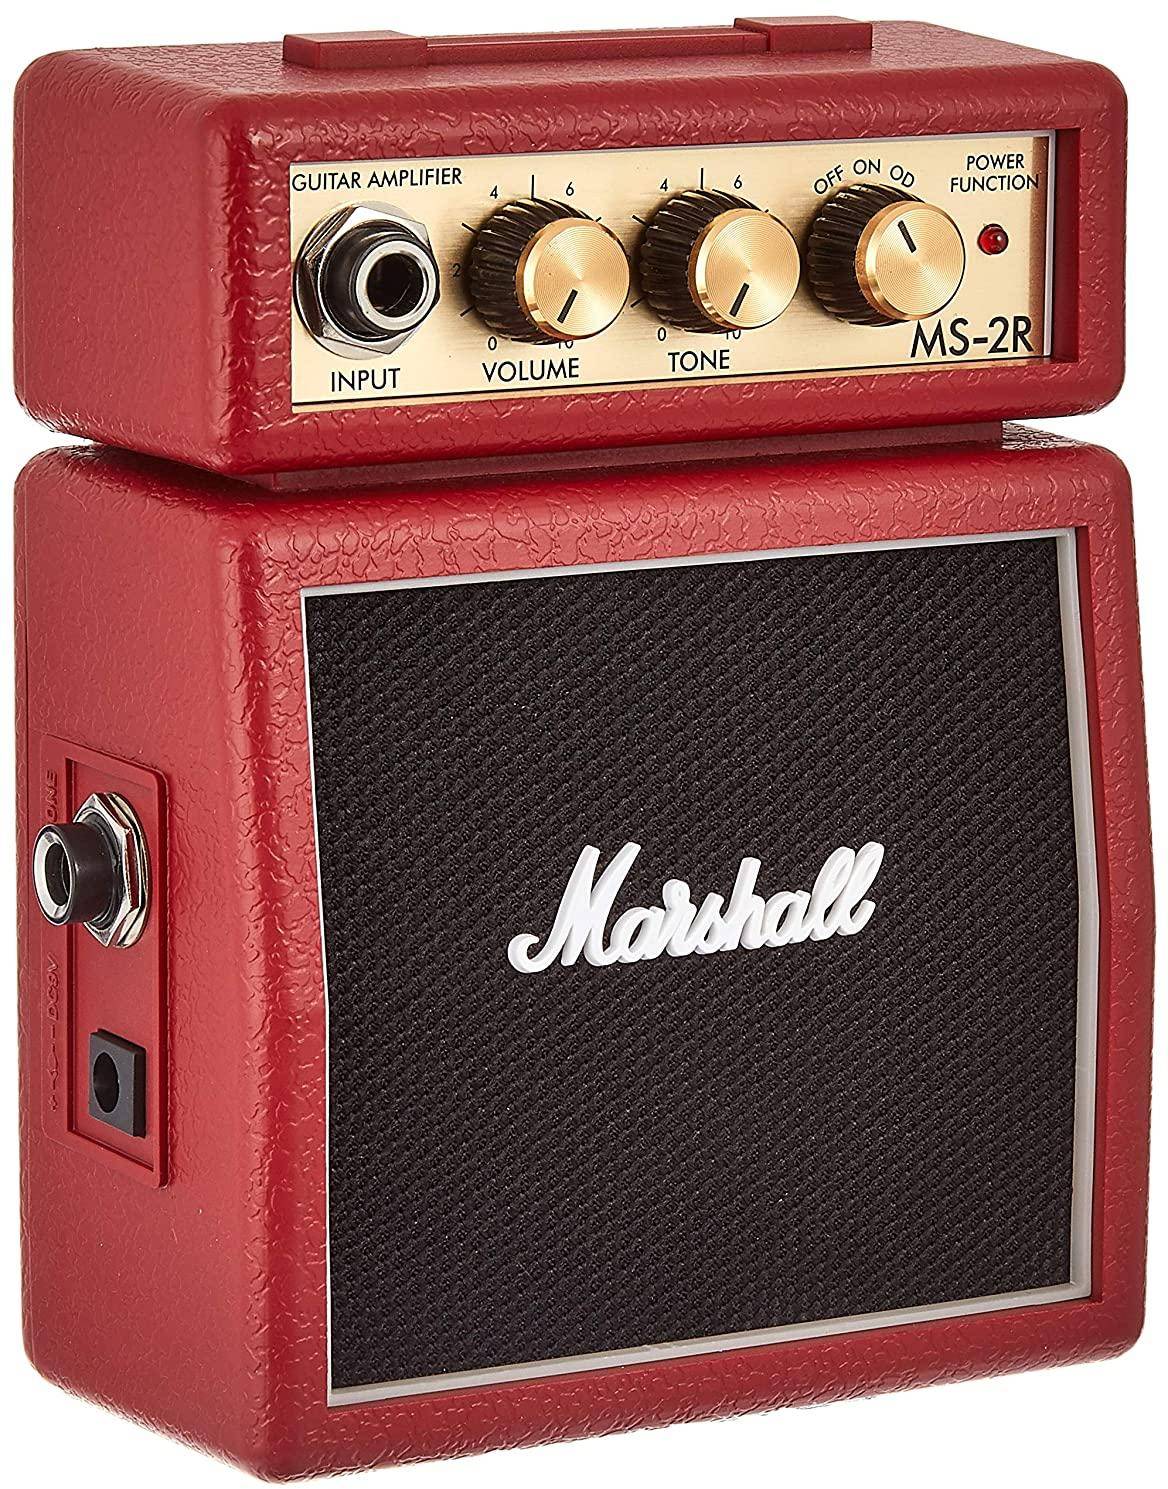 Marshall Amplification MS-2R Micro Guitar Amplifier zoom image